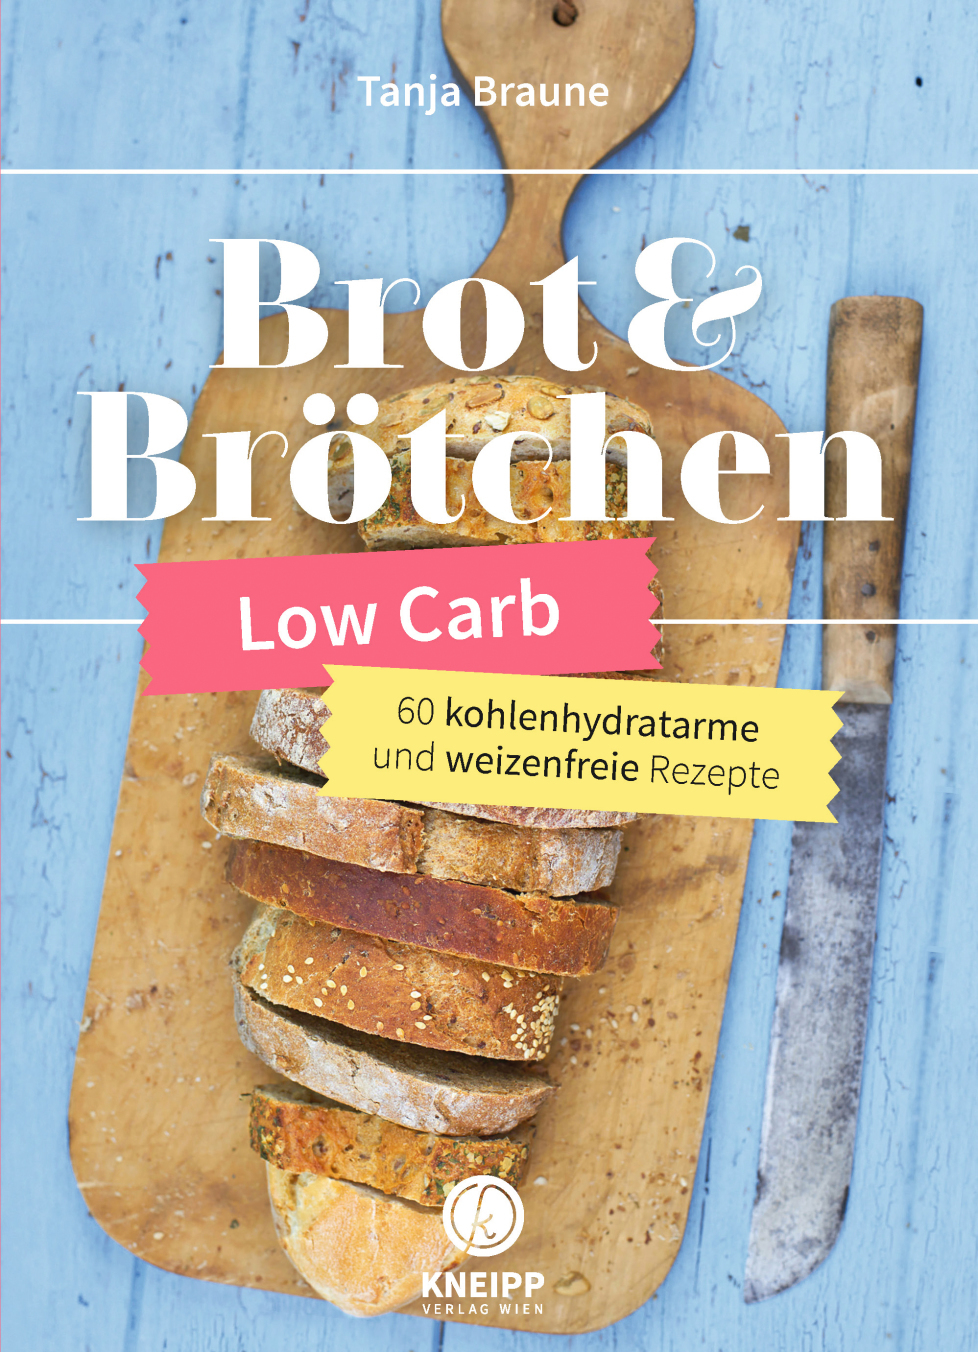 Brot & Brötchen Low Carb